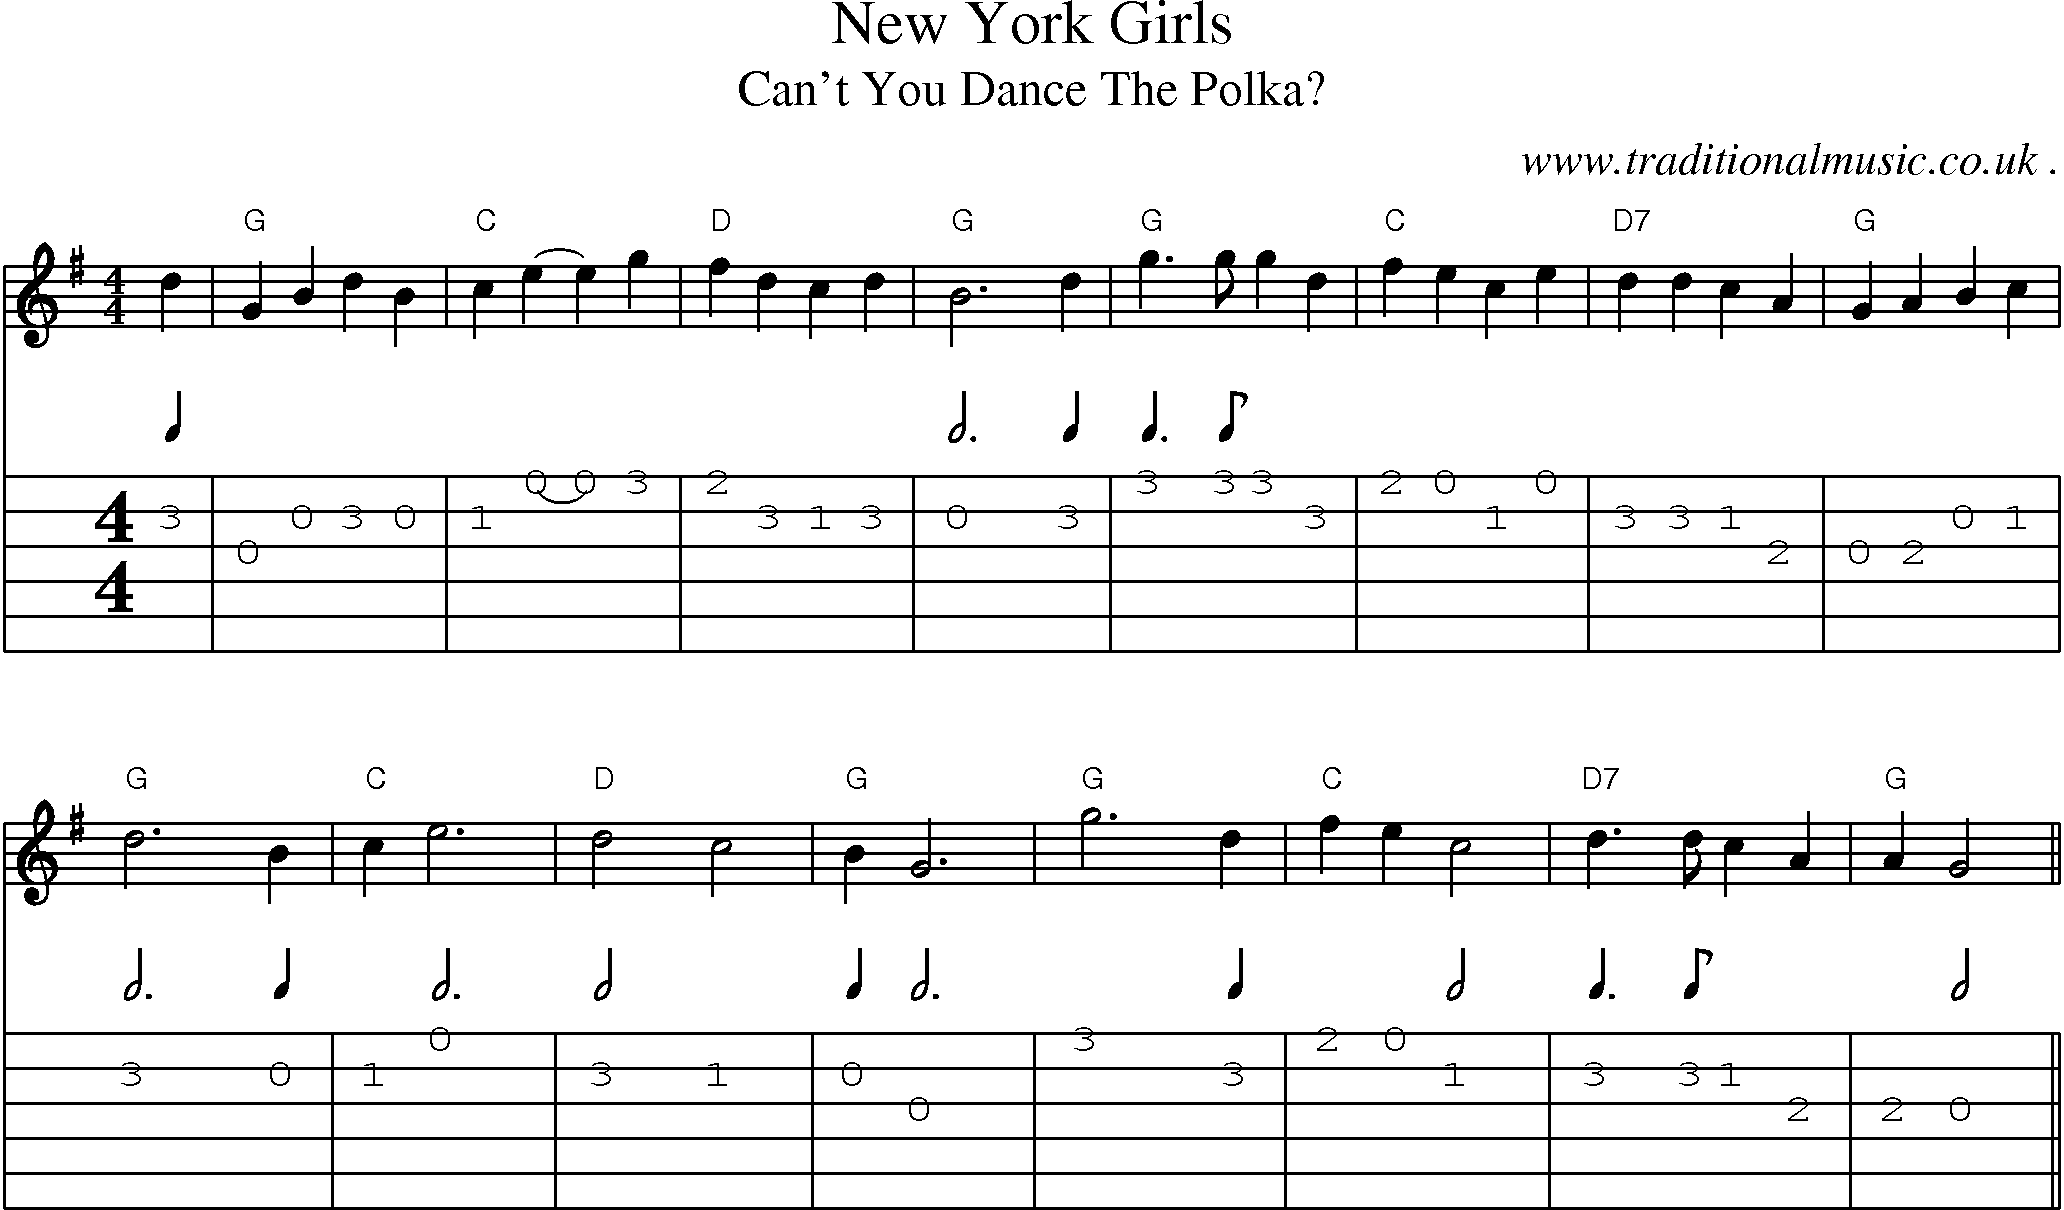 Music Score and Guitar Tabs for New York Girls